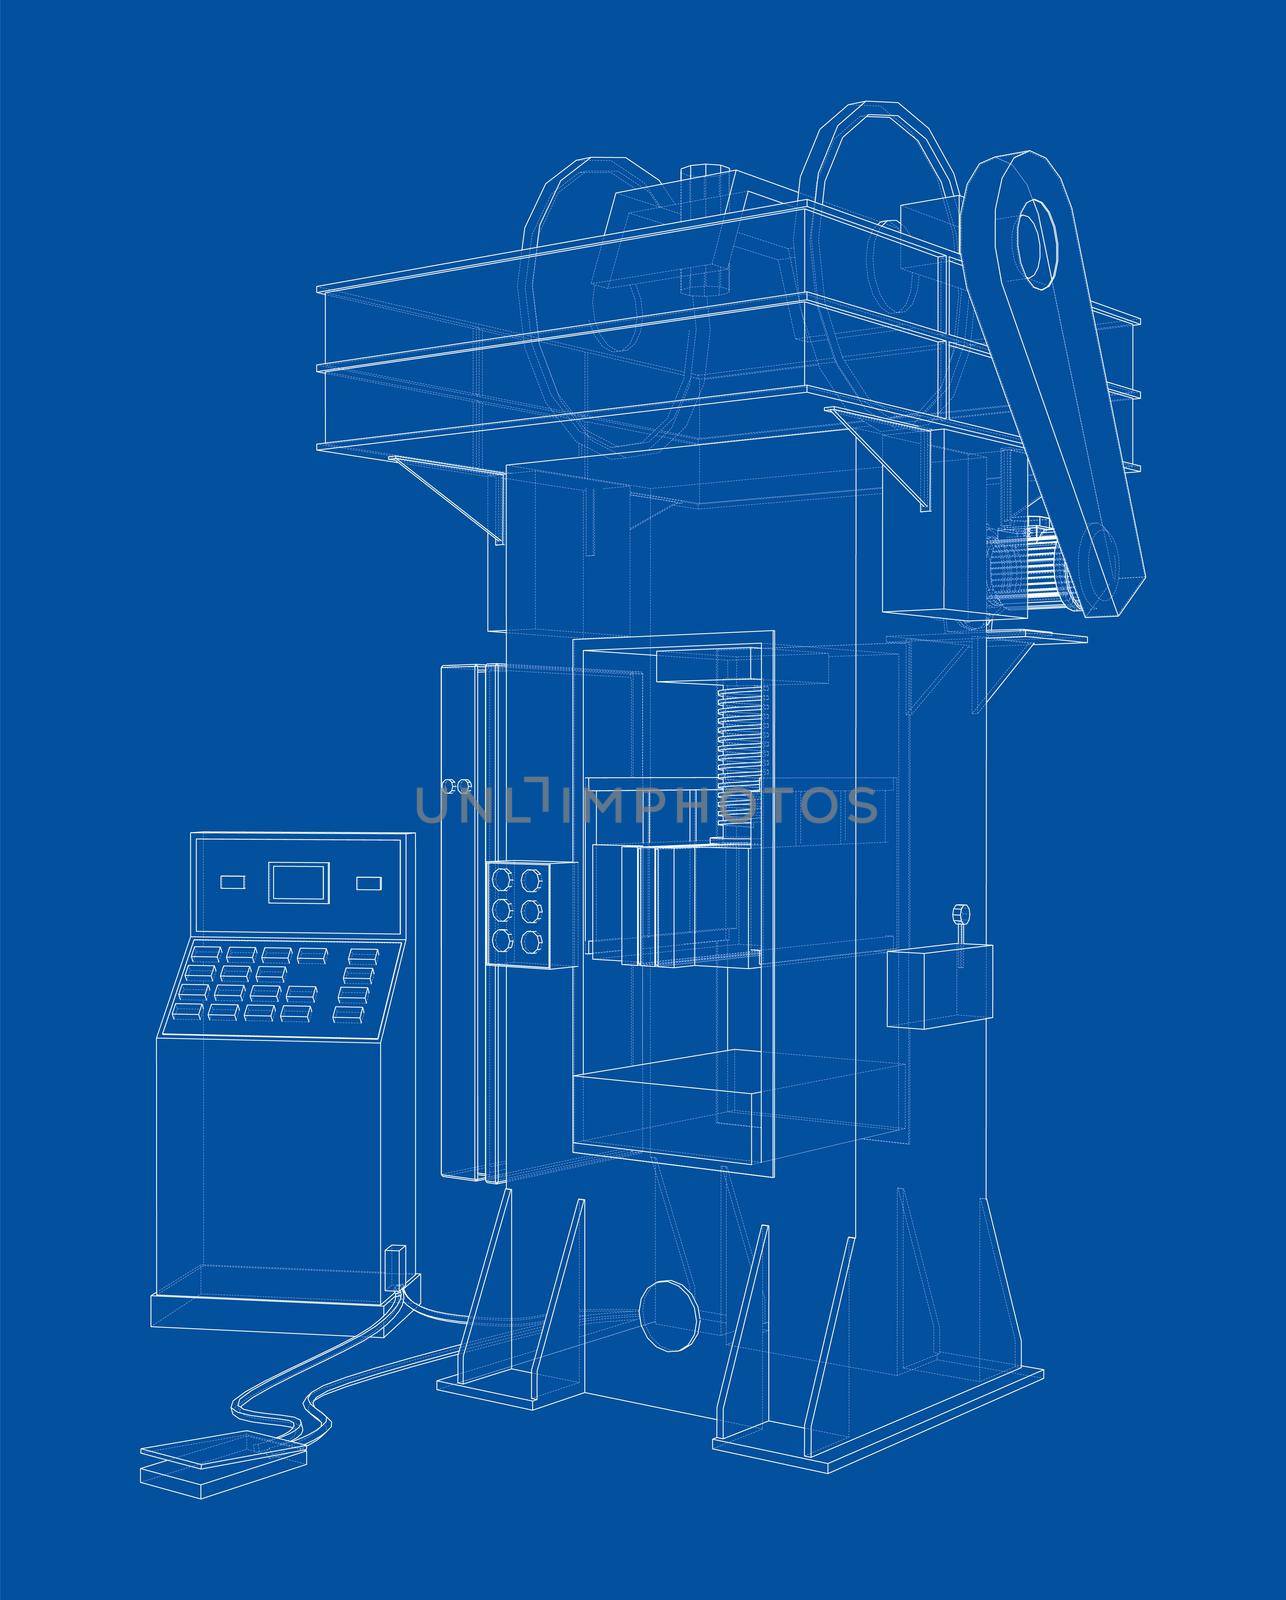 Friction screw press concept outline. 3d illustration. Wire-frame style